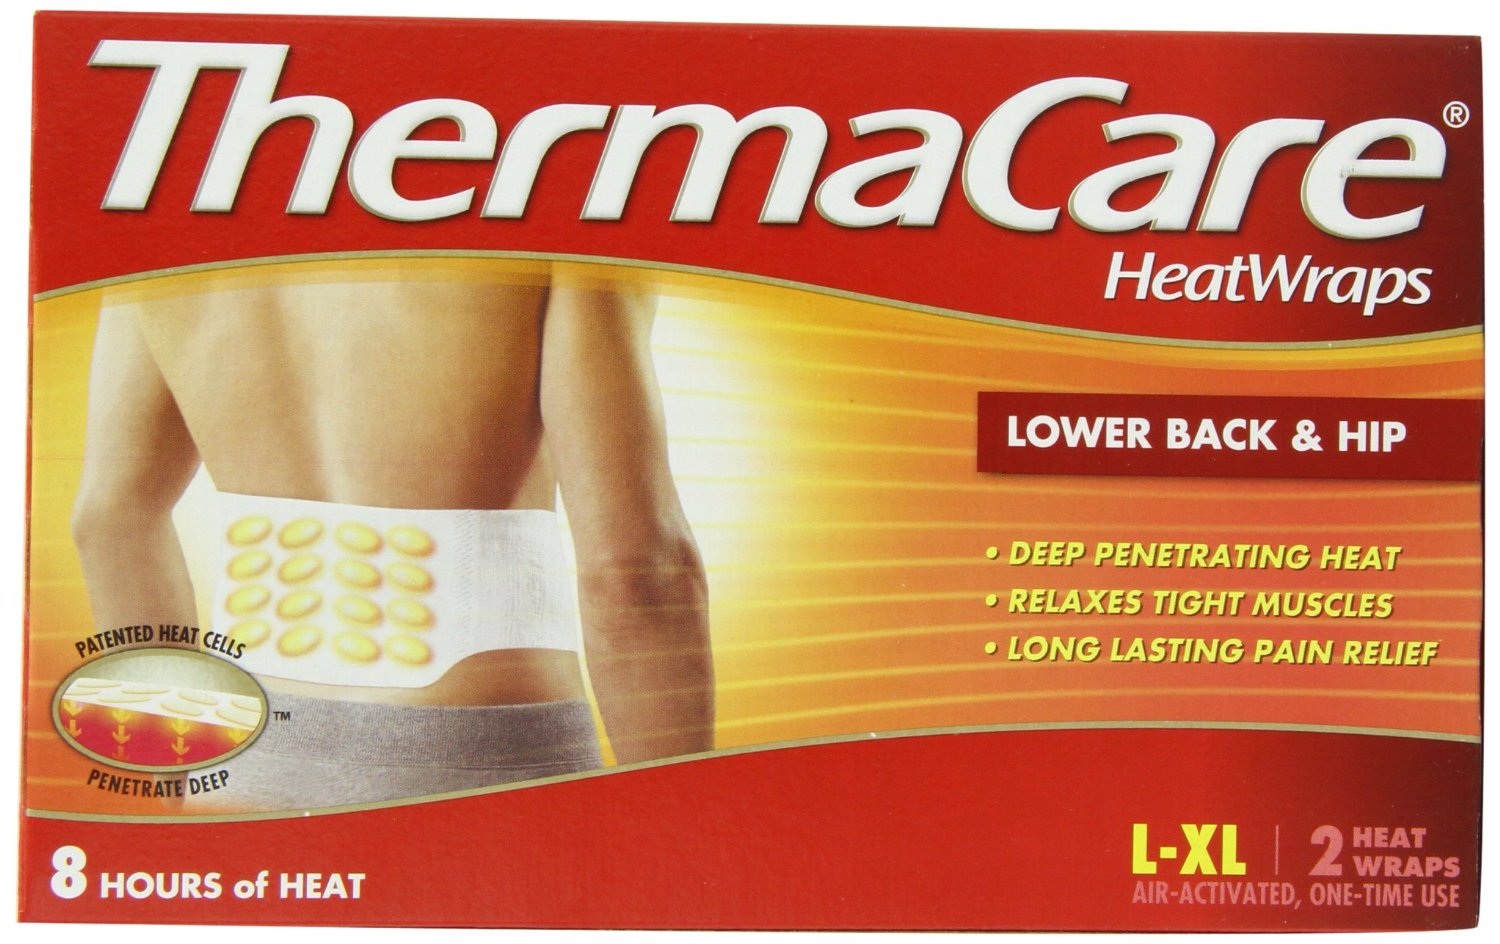 cvs-thermacare-heatwraps-only-2-99-become-a-coupon-queen